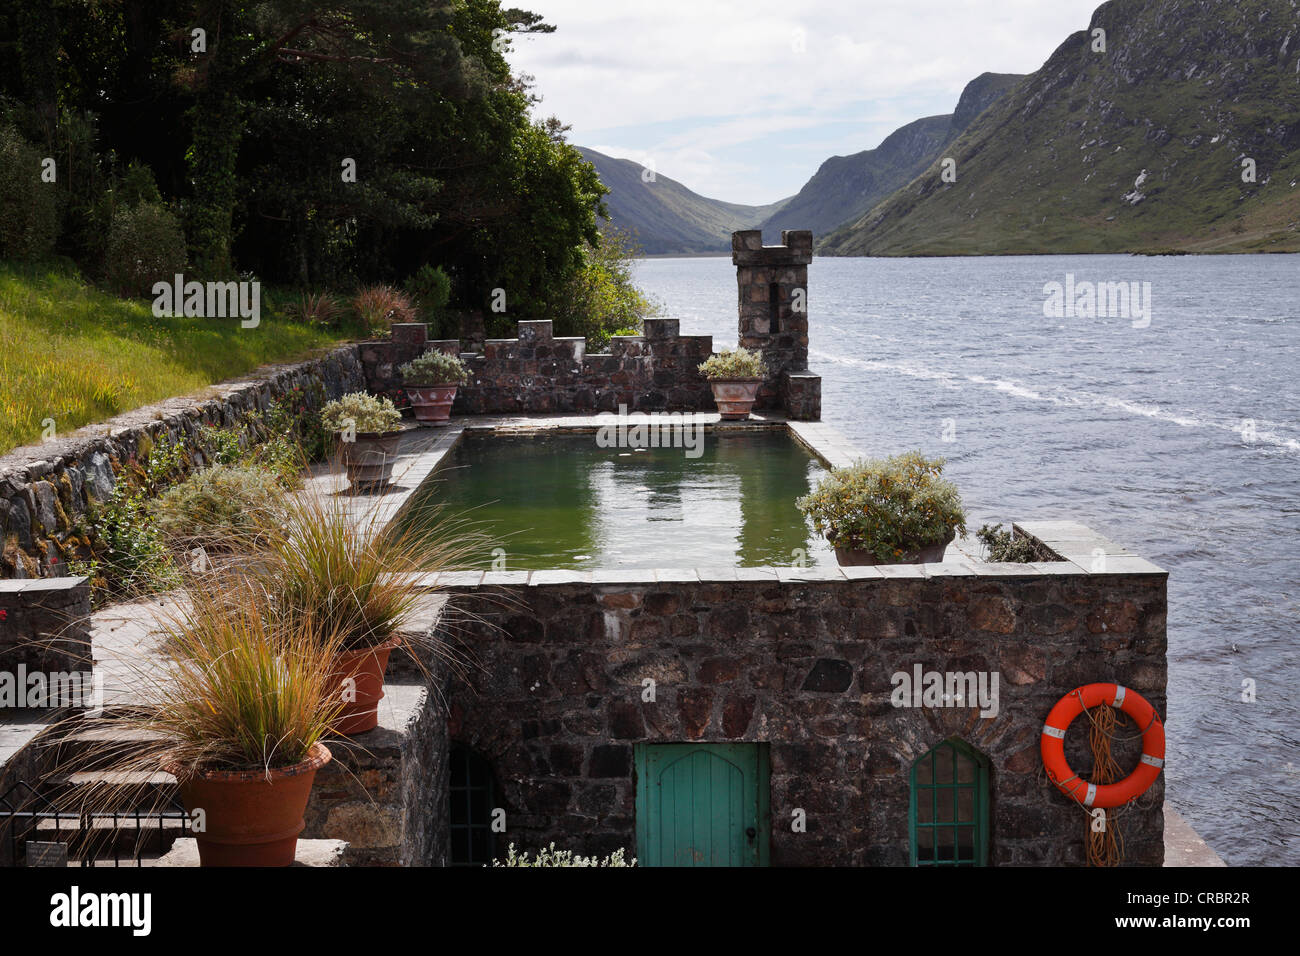 Pool and boathouse on Lough Veagh, Glenveagh Castle and Gardens, Glenveagh National Park, County Donegal, Ireland, Europe Stock Photo